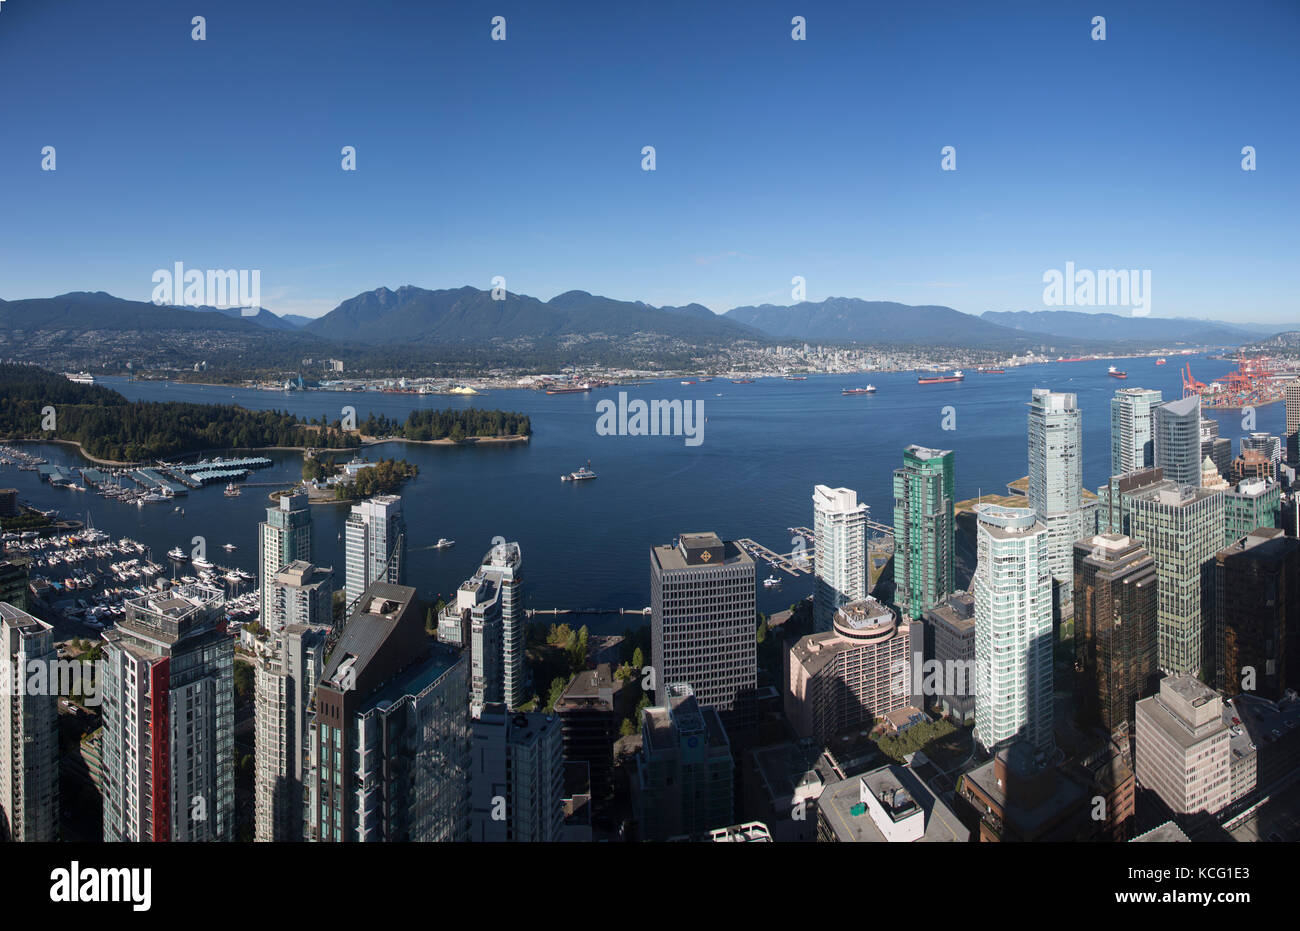 North America, Canada, British Columbia, Vancouver, high angle view of Vancouver, showing Stanley Park. City skyline with waterfront and harbour area  Stock Photo